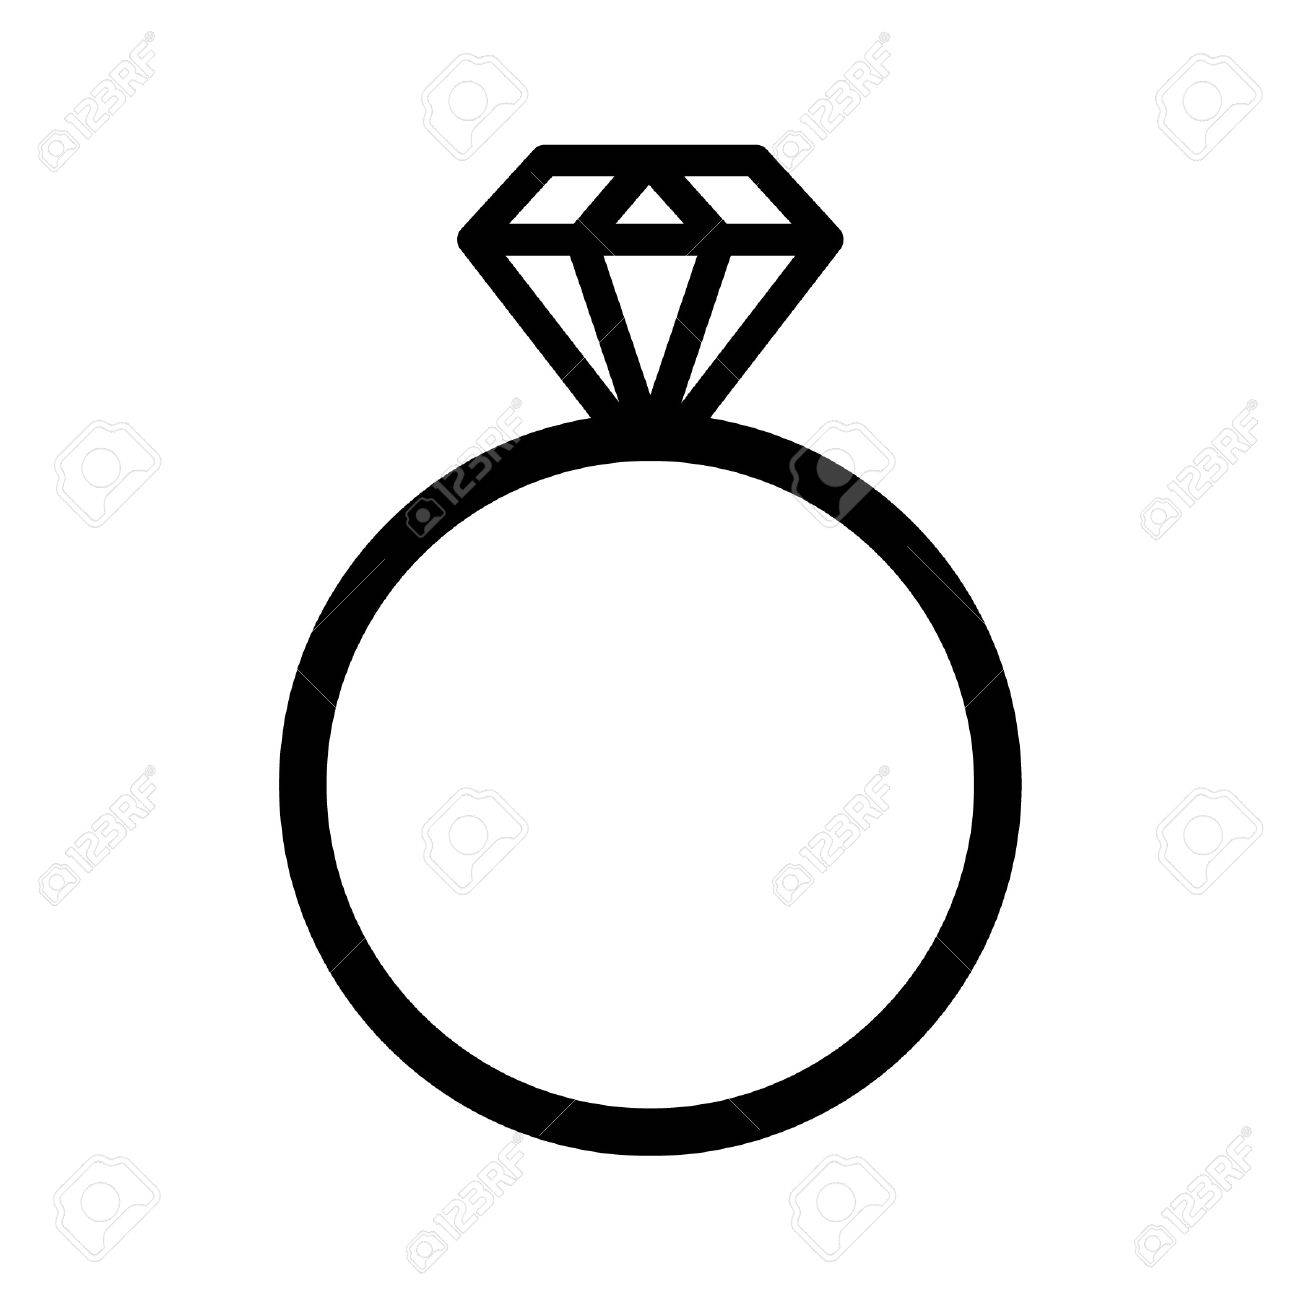 Diamond Line Art | Free download on ClipArtMag